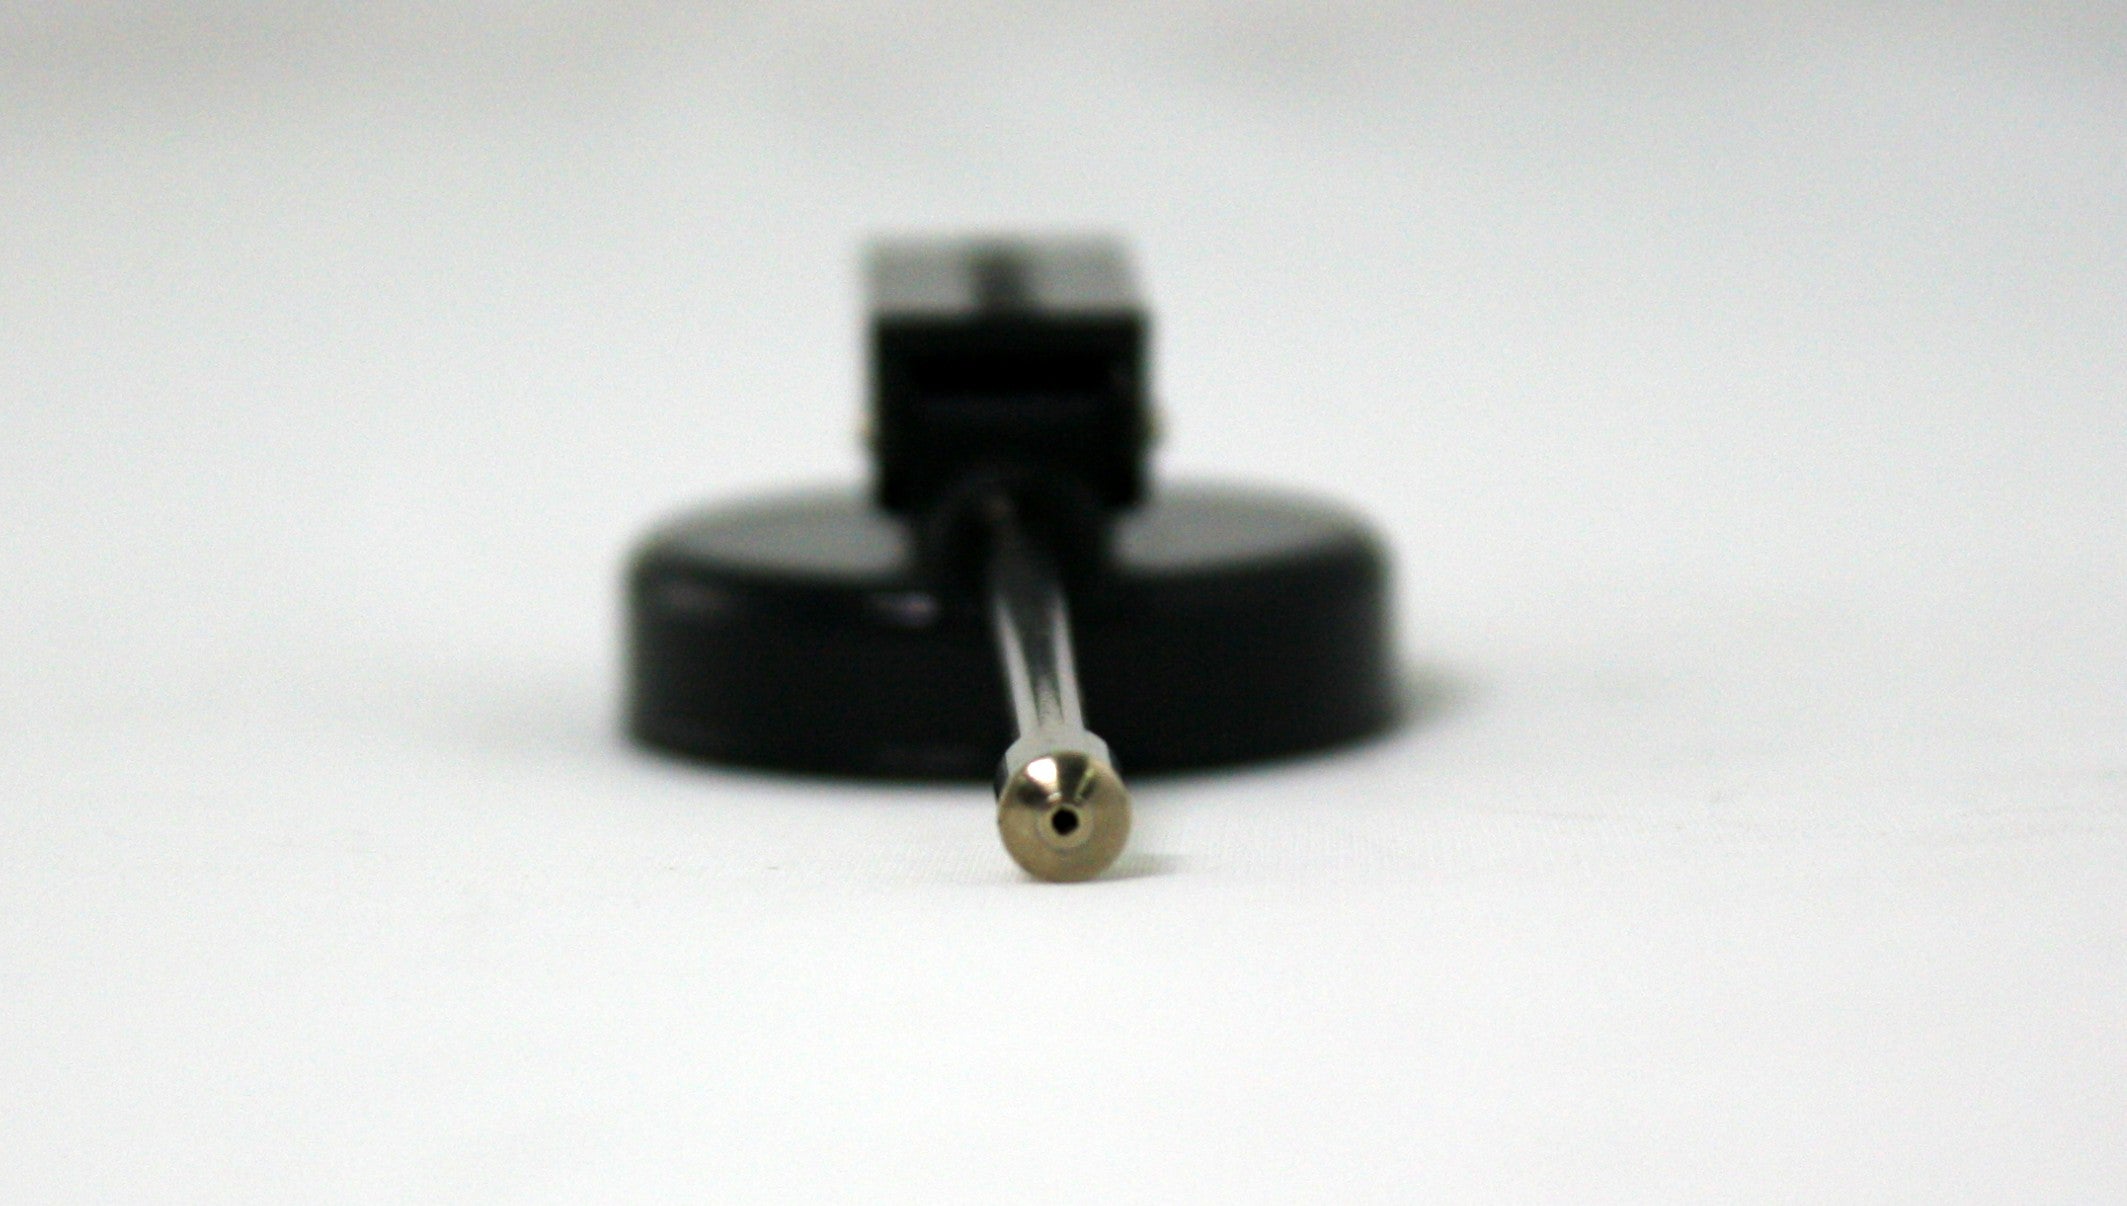 A close up of the nozzle tip